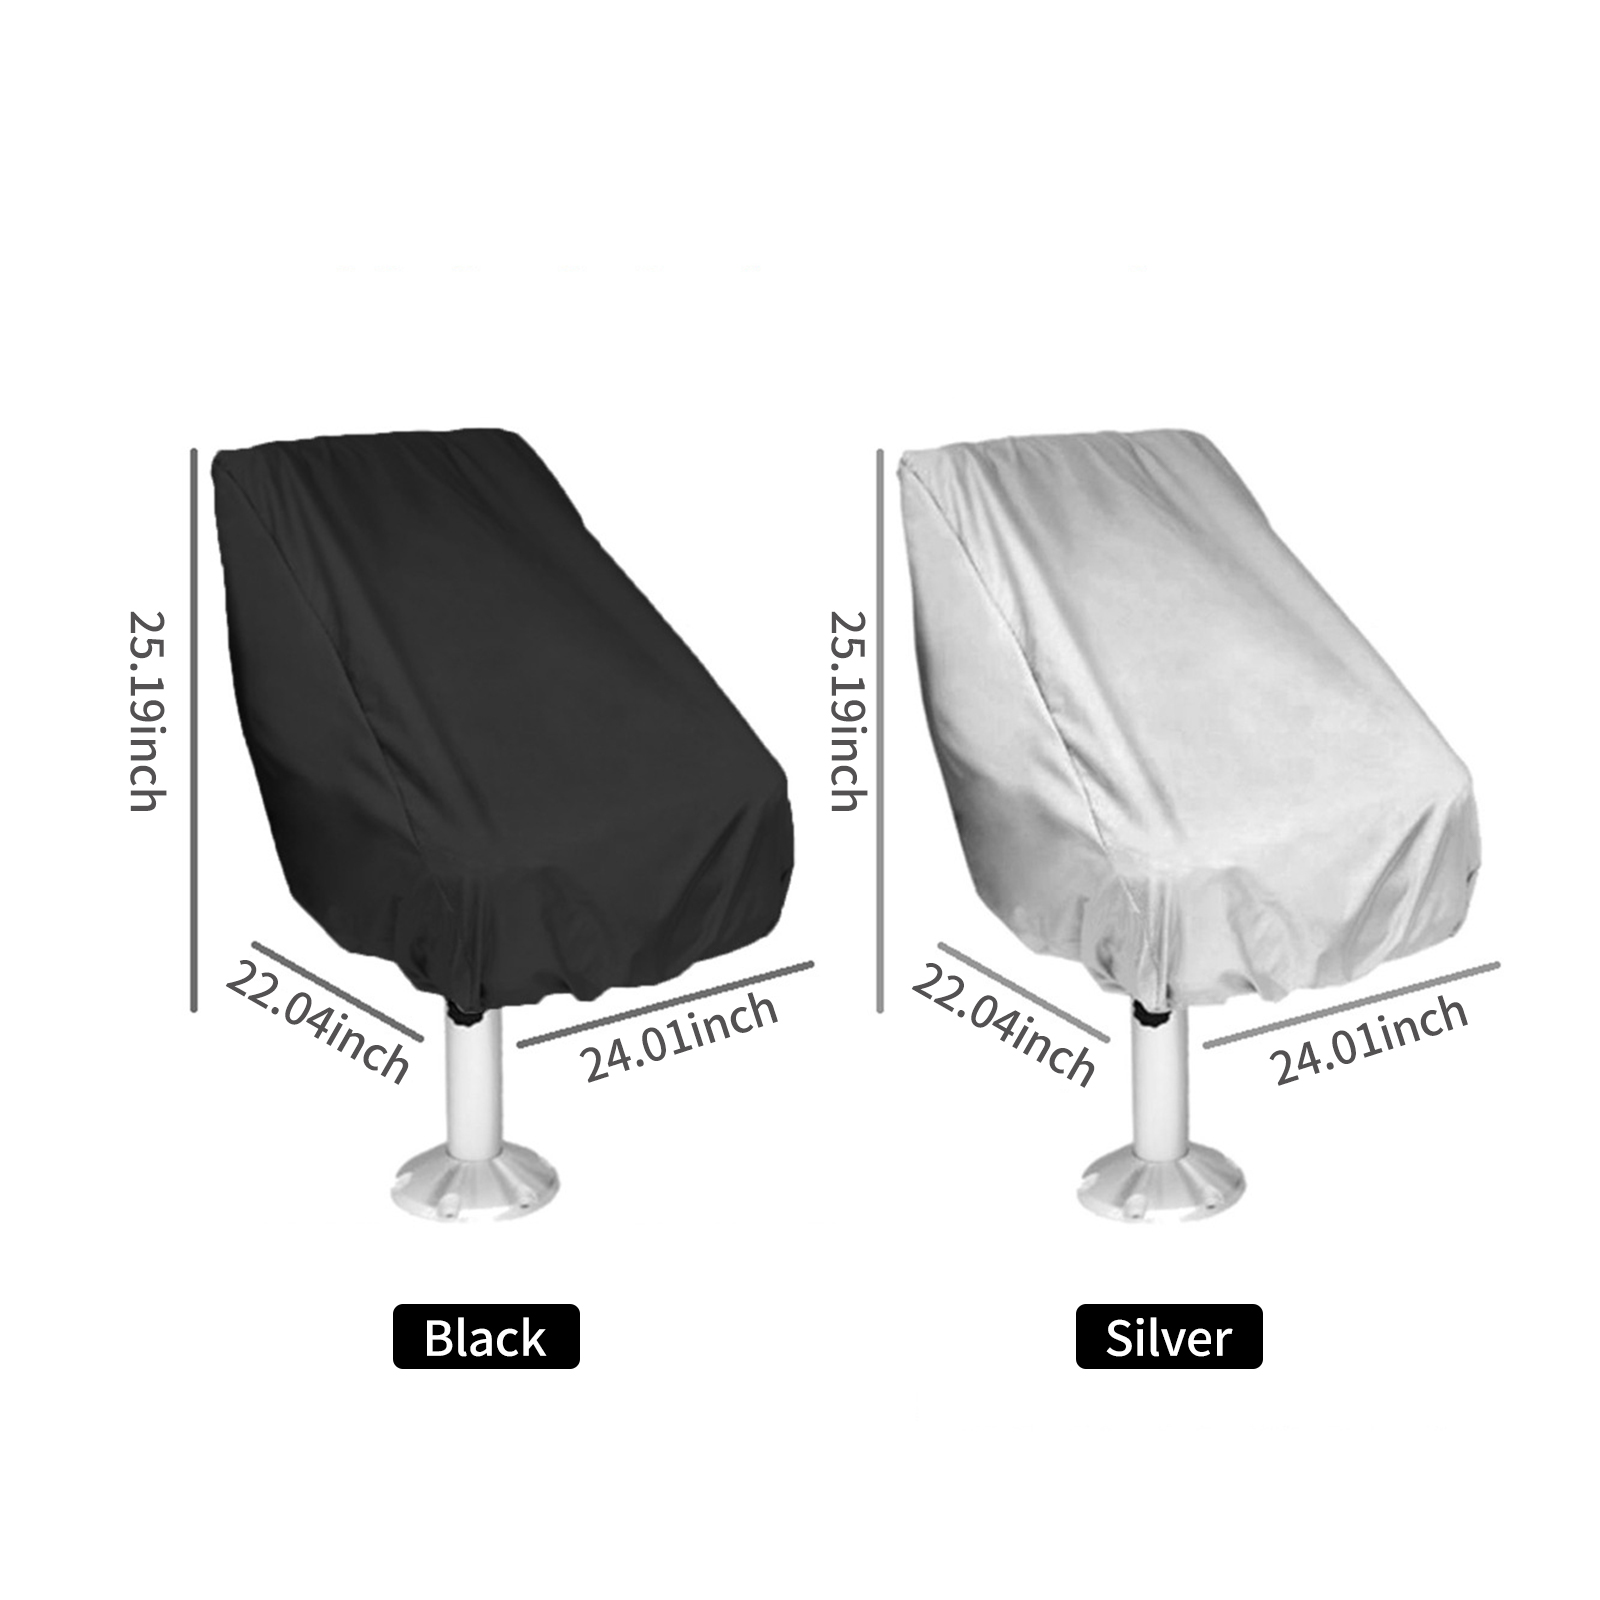 Tomshoo Boat Seat Cover, UV Blocking & Waterproof, Protects Against Wind, Rain, and Dust - image 2 of 7